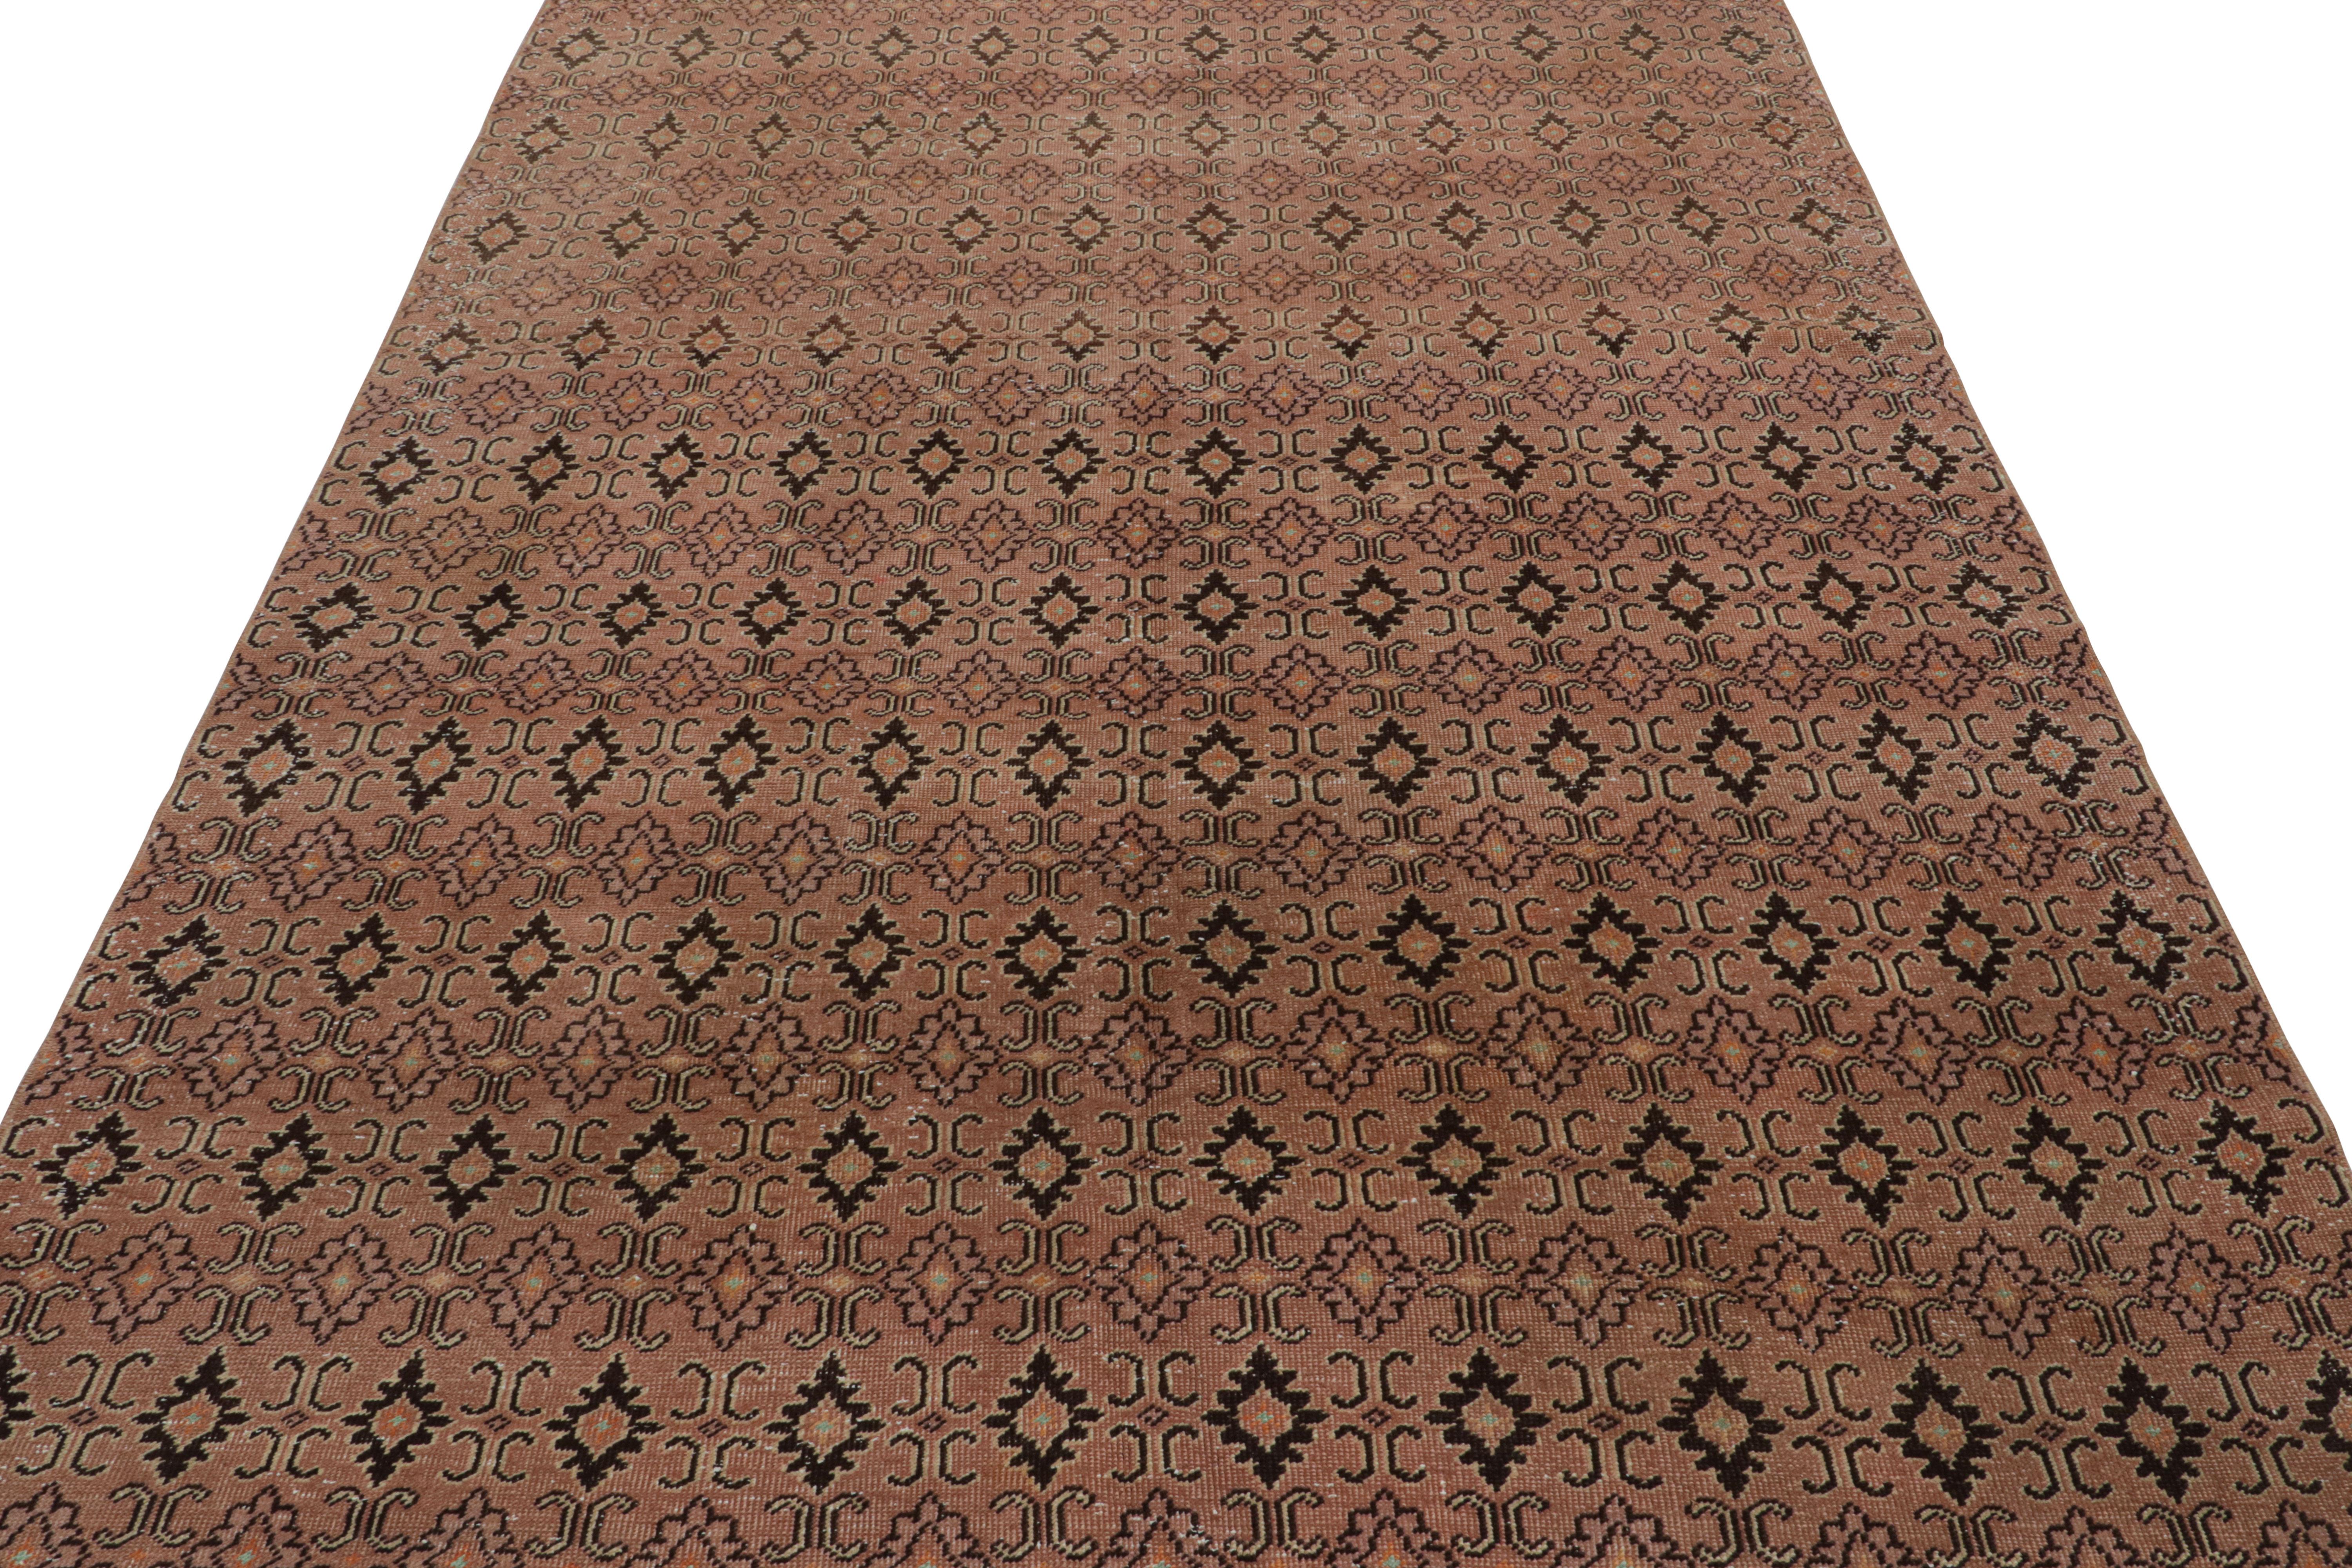 Turkish Vintage Rug with Beige-Brown and Black Geometric Patterns, from Rug & Kilim For Sale